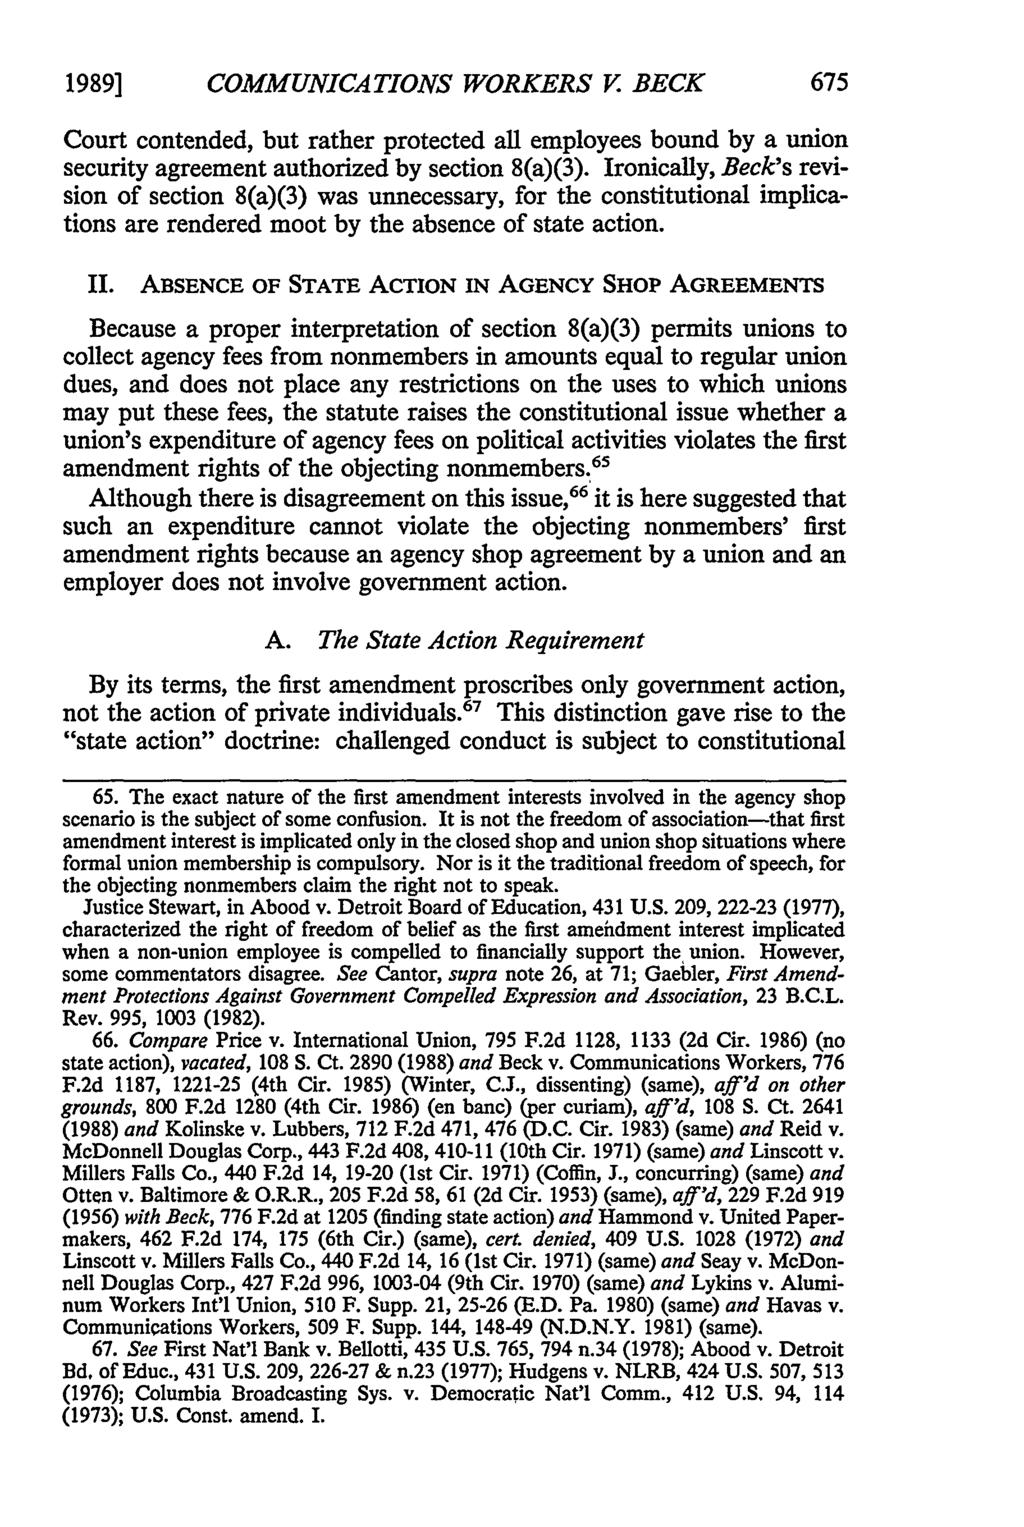 1989] COMMUNICATIONS WORKERS V BECK Court contended, but rather protected all employees bound by a union security agreement authorized by section 8(a)(3).